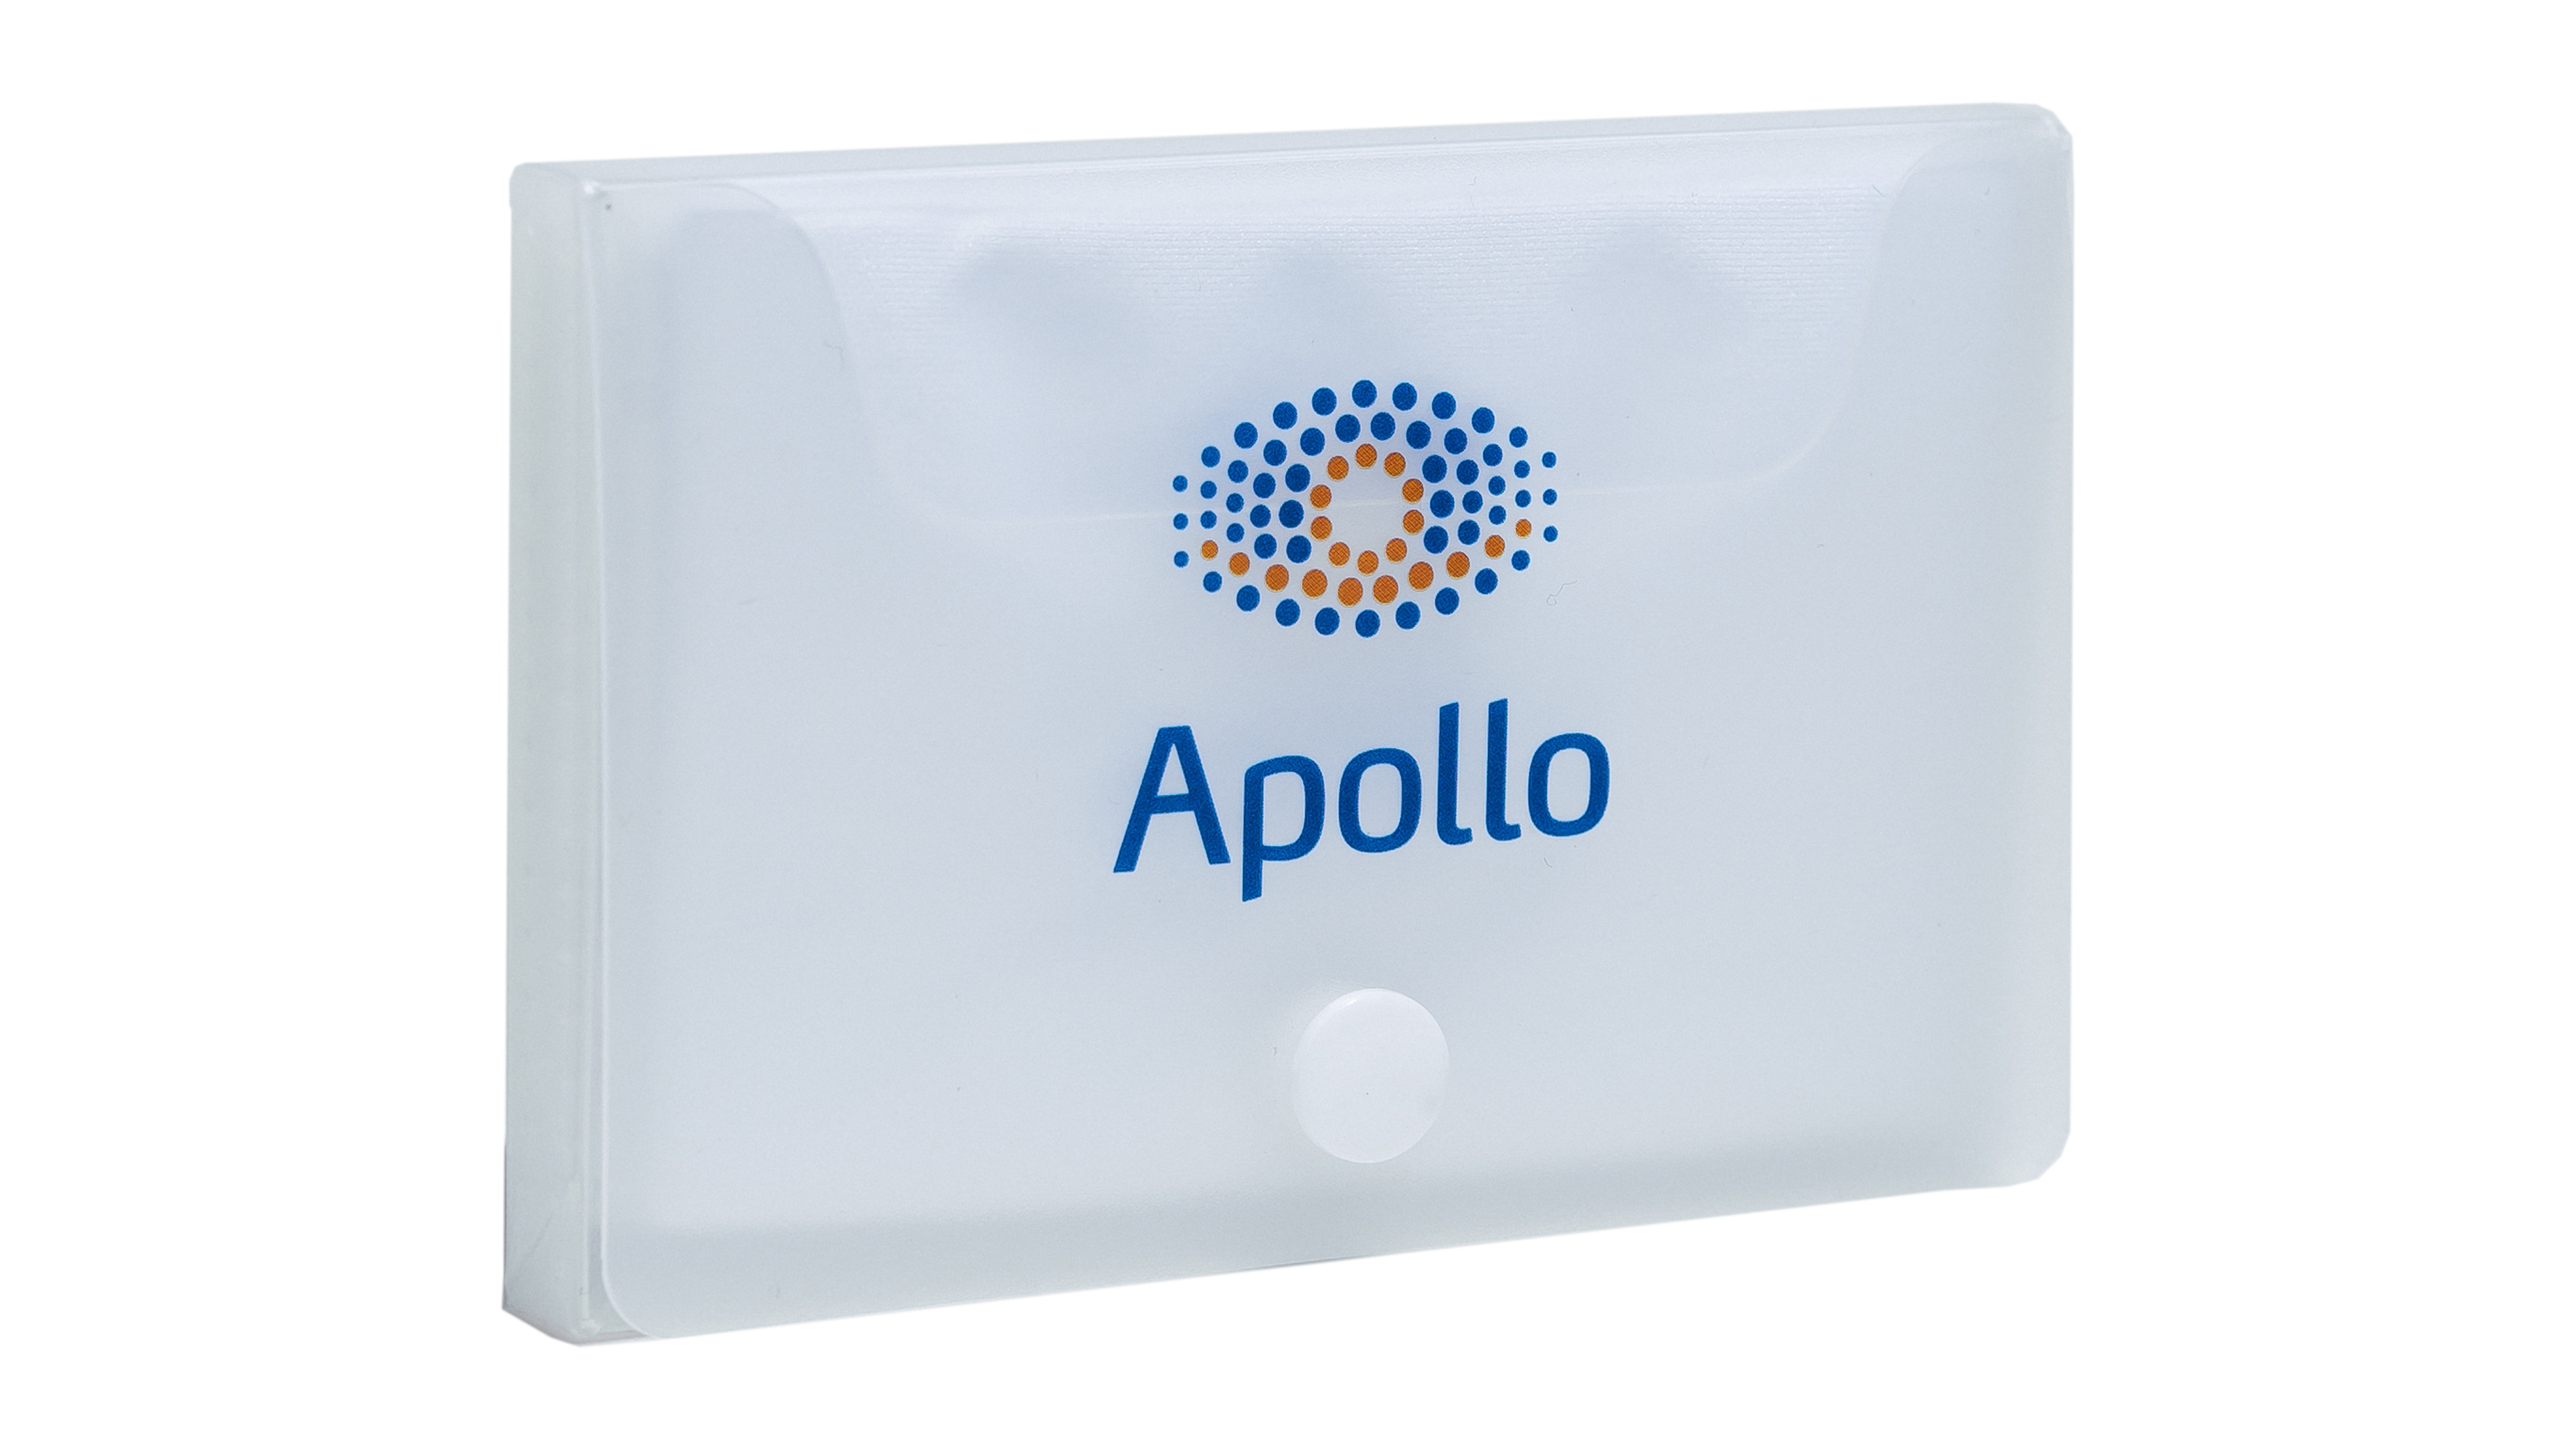 [products.image.front] Apollo Accessoire